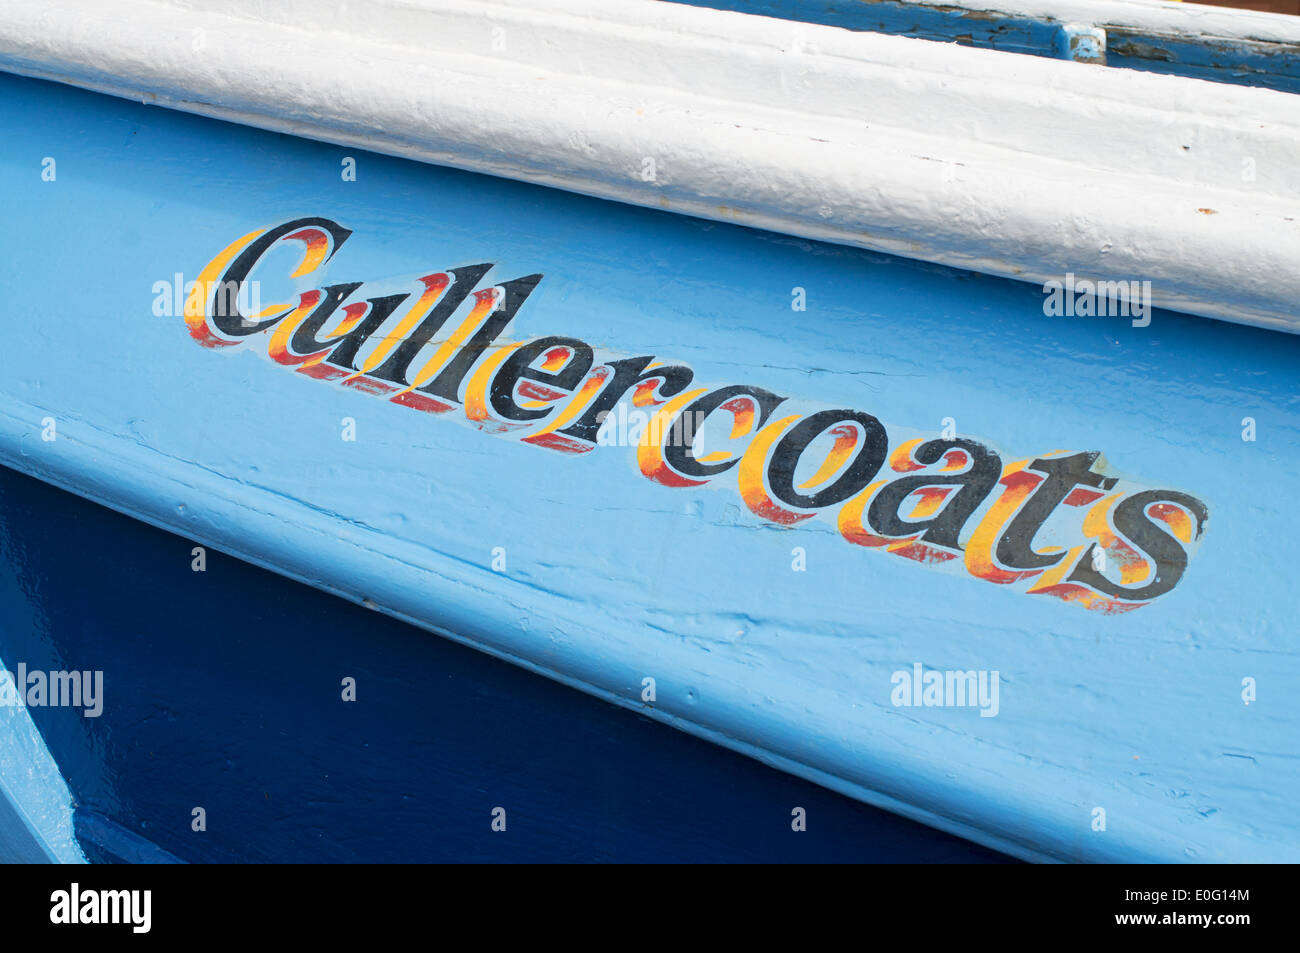 Fishing coble from Cullercoats north east England, UK Stock Photo